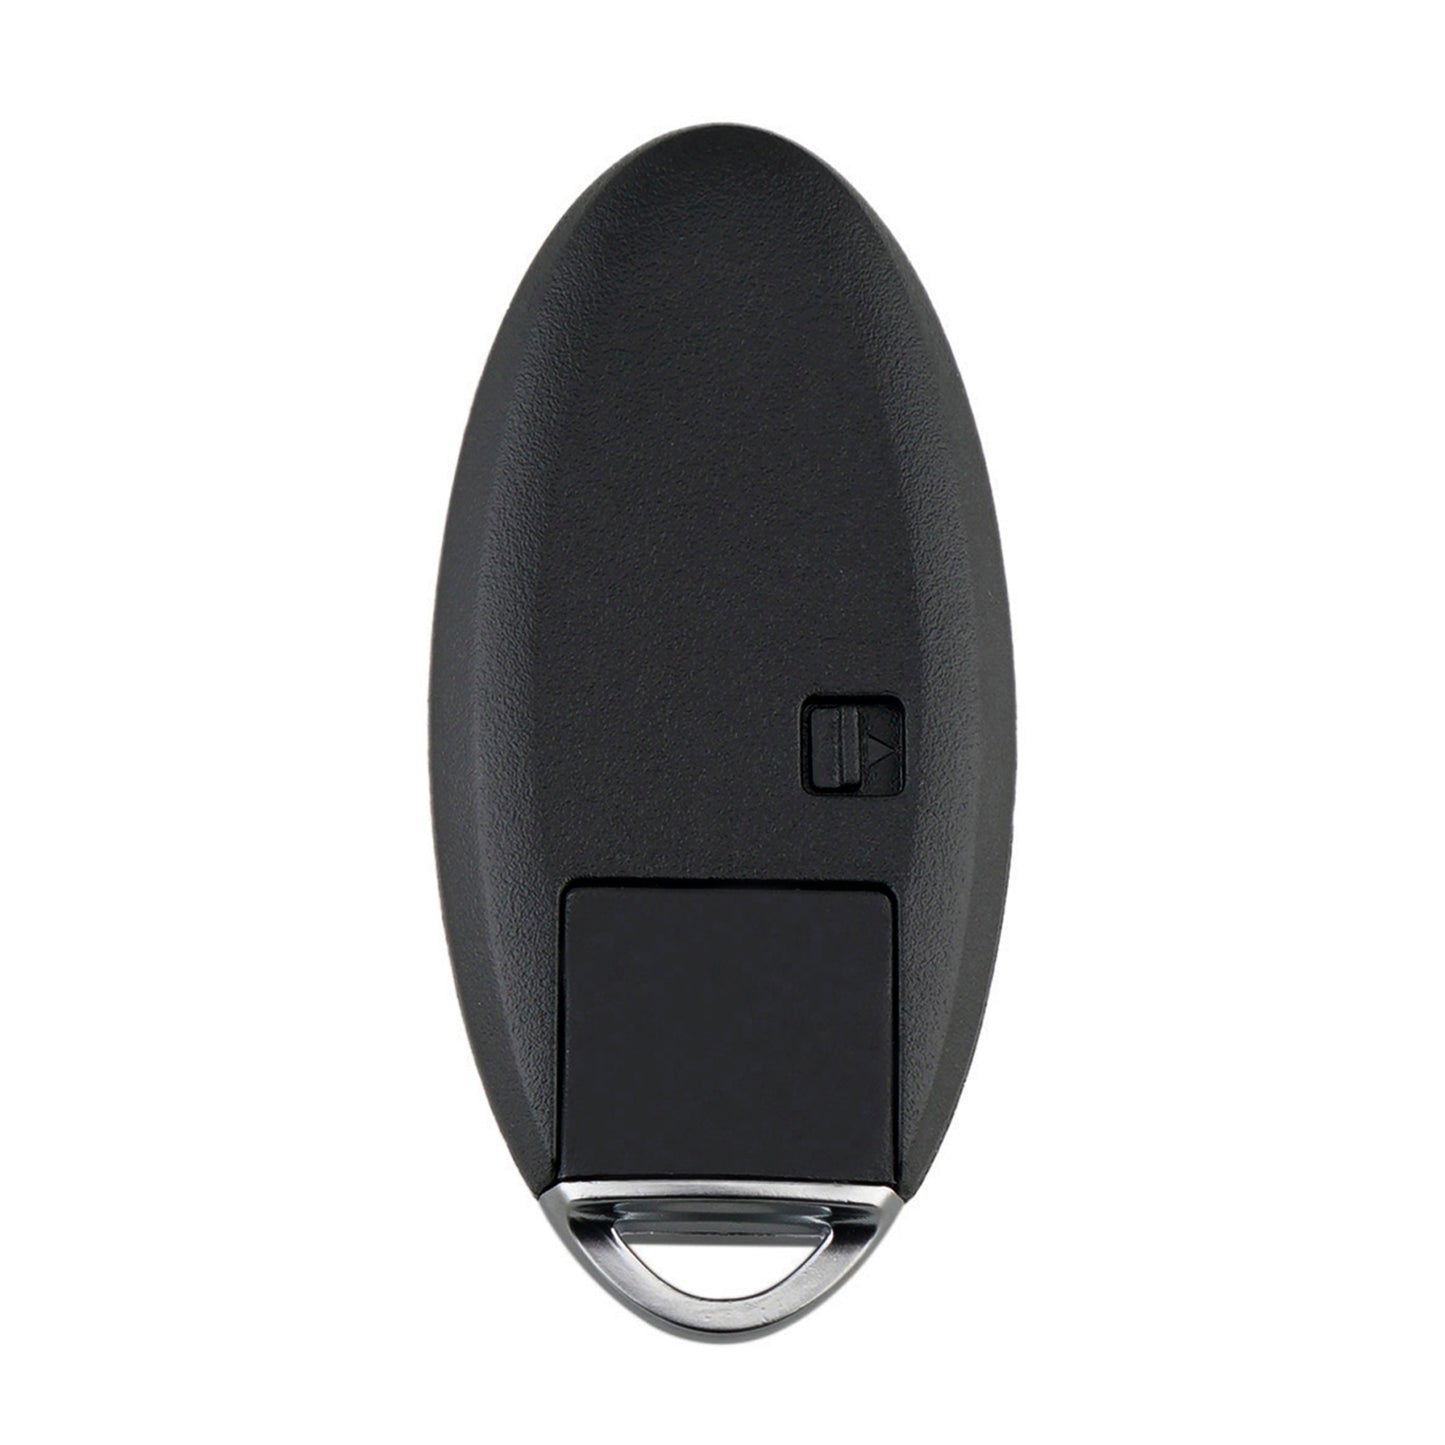 5 Buttons 433MHz Smart Remote Car Key For 2015-2018 Nissan Maxima Altima  Infiniti Q50 ( 5 Button Remotes Only) Q60 SKU : J323